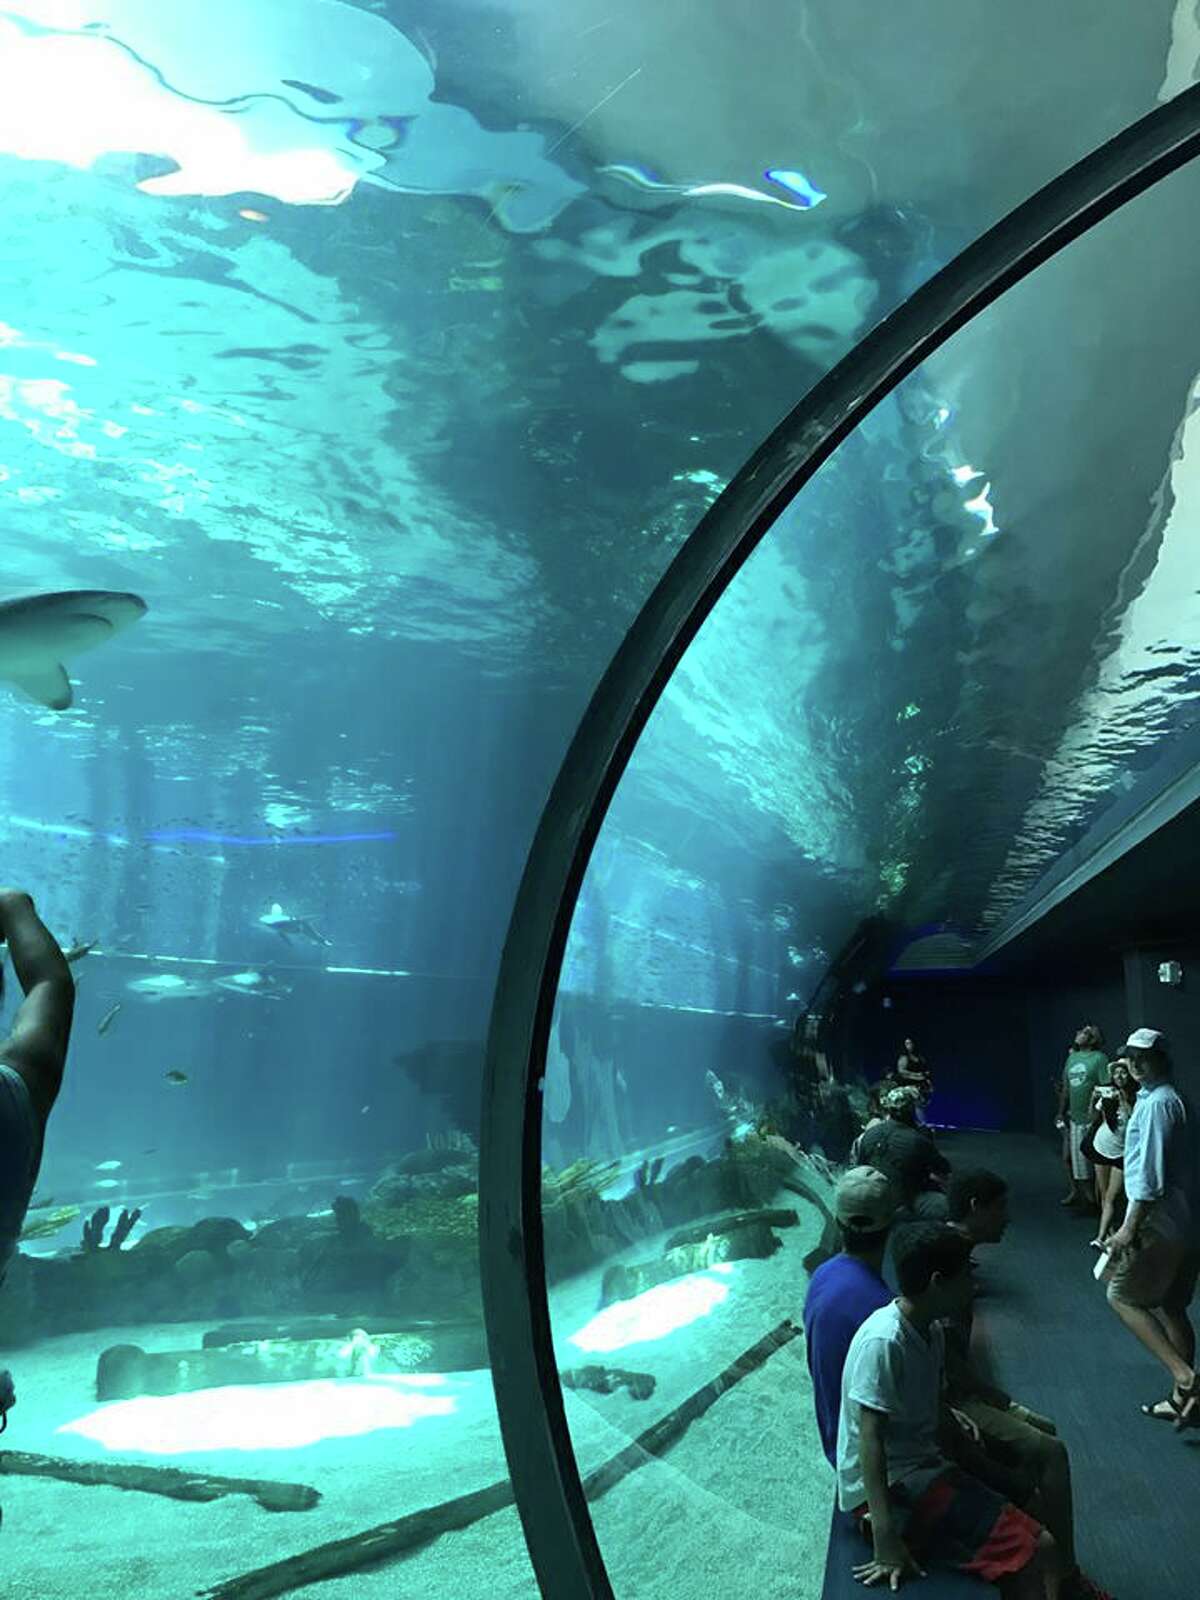 Attendance spikes at Texas State Aquarium in Corpus after new 60M wing